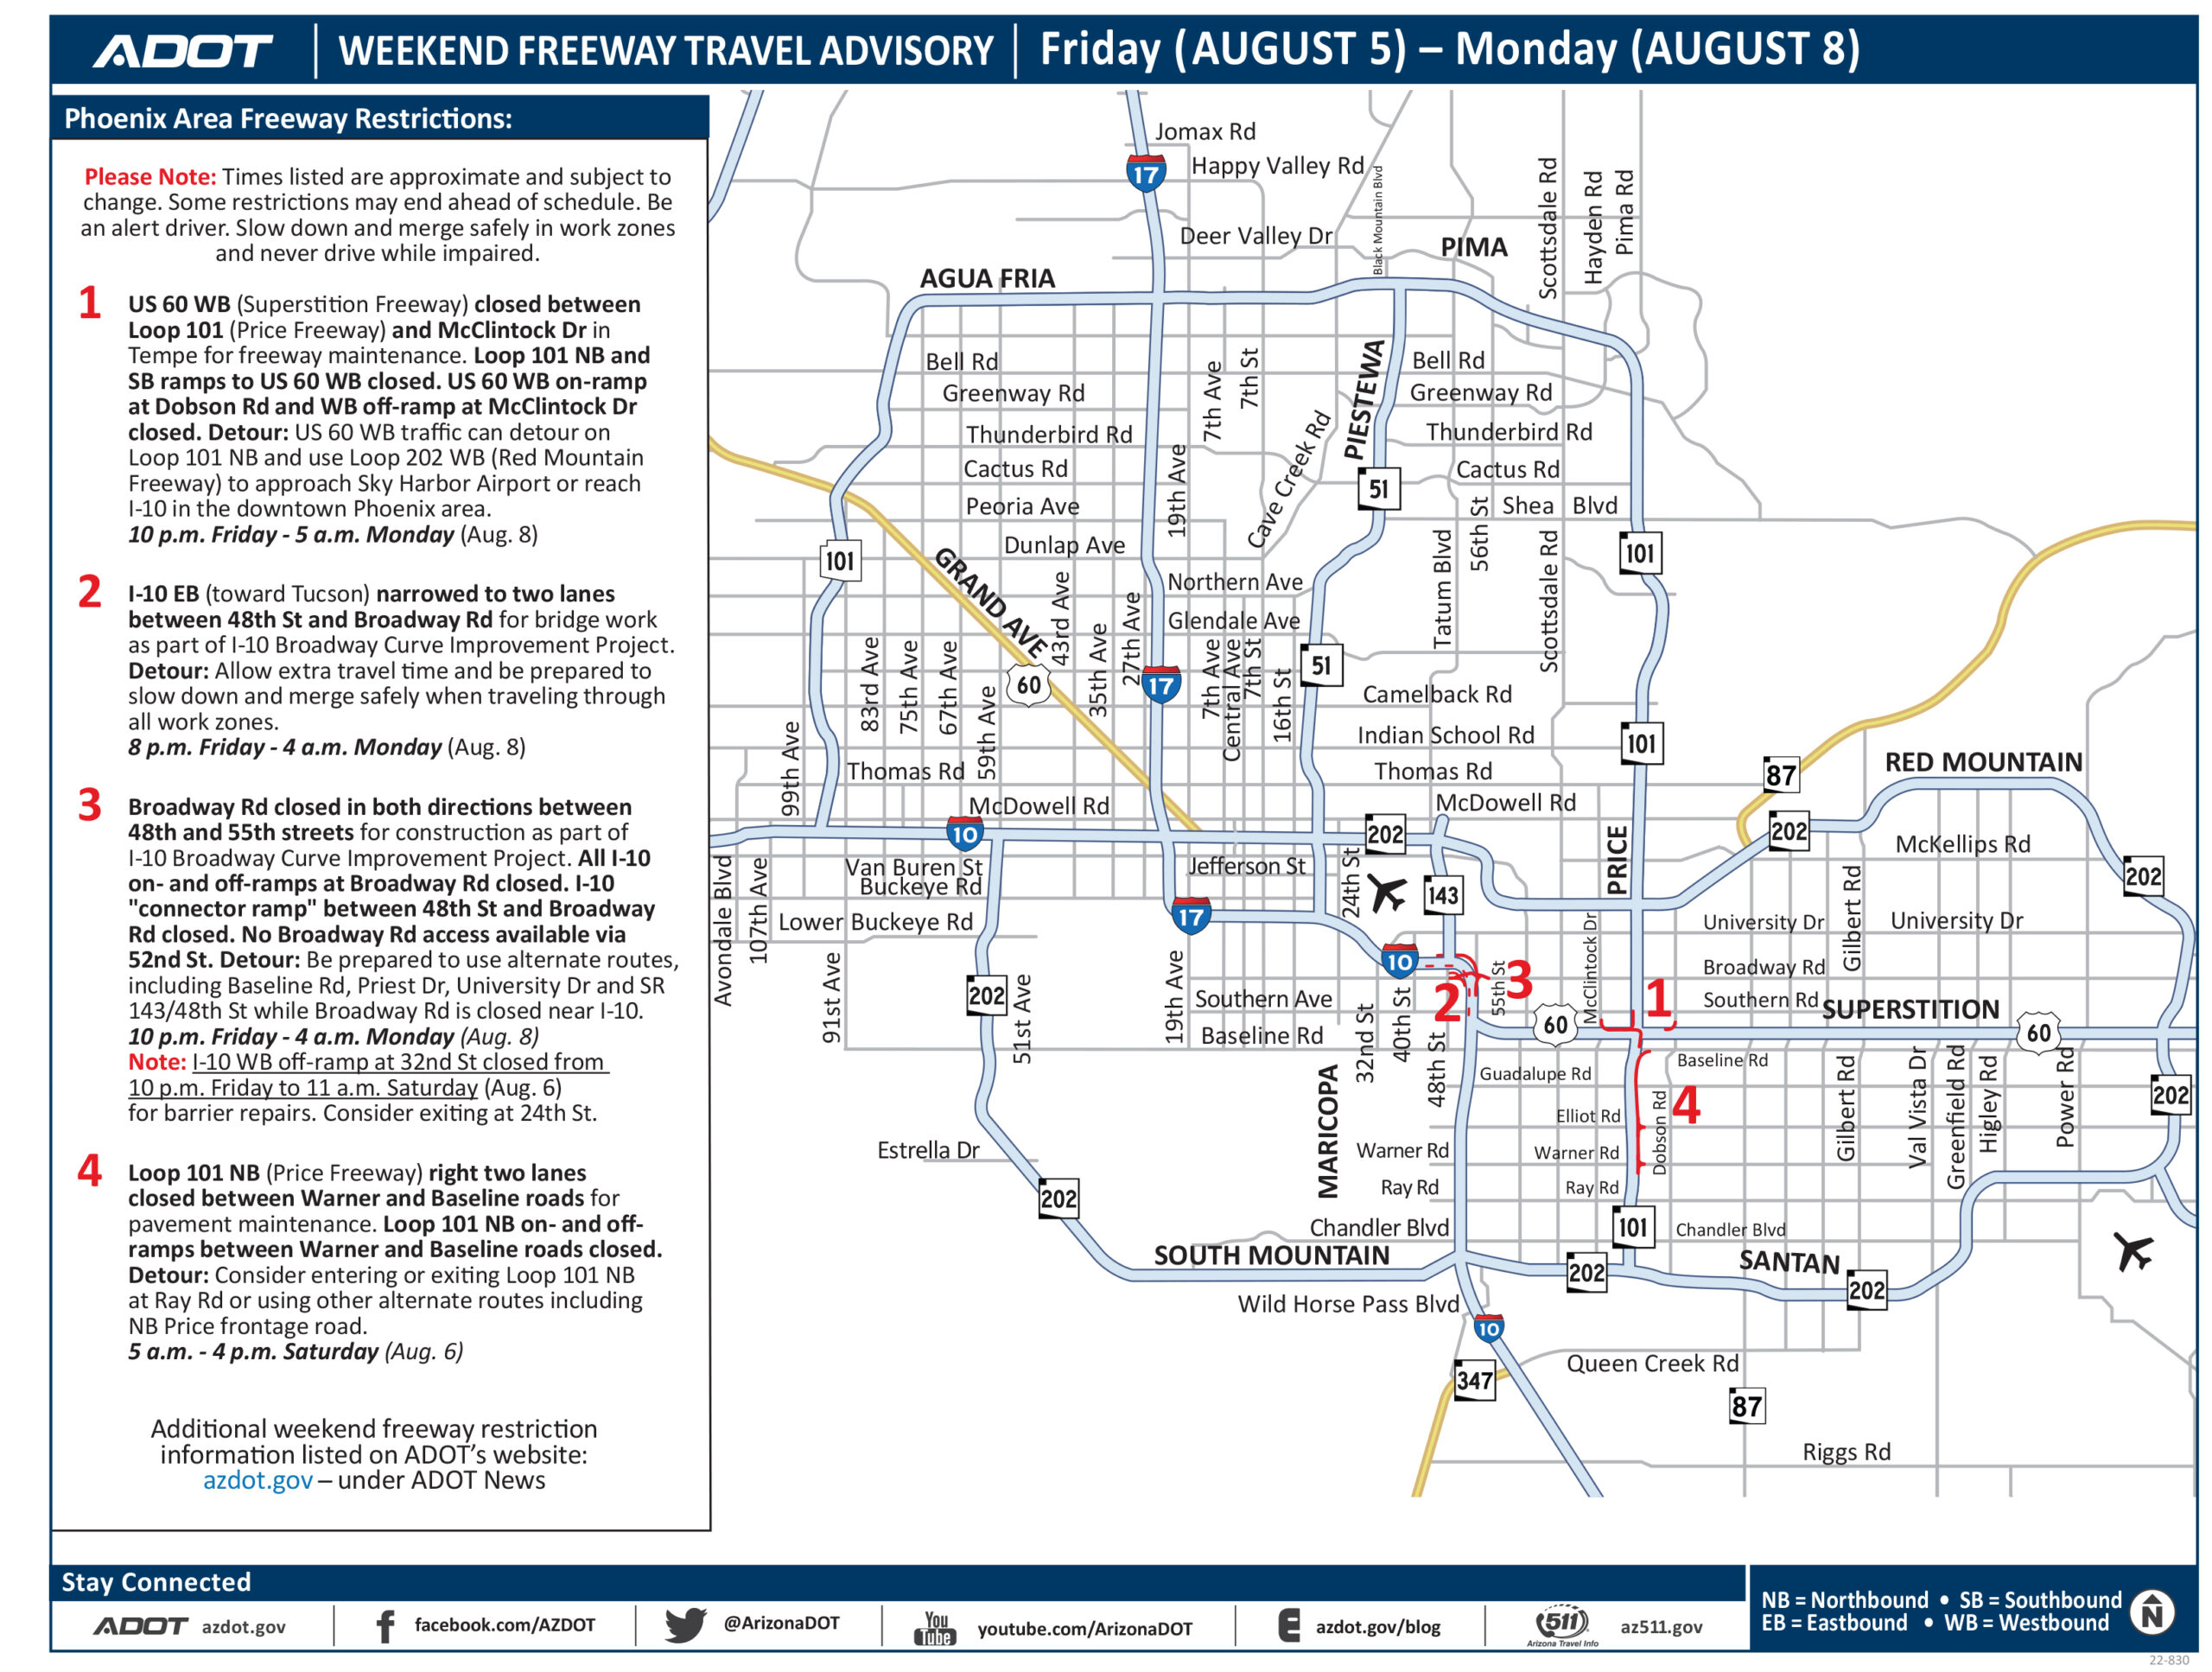 Phoenix-area freeway restrictions this weekend, Aug. 5–8